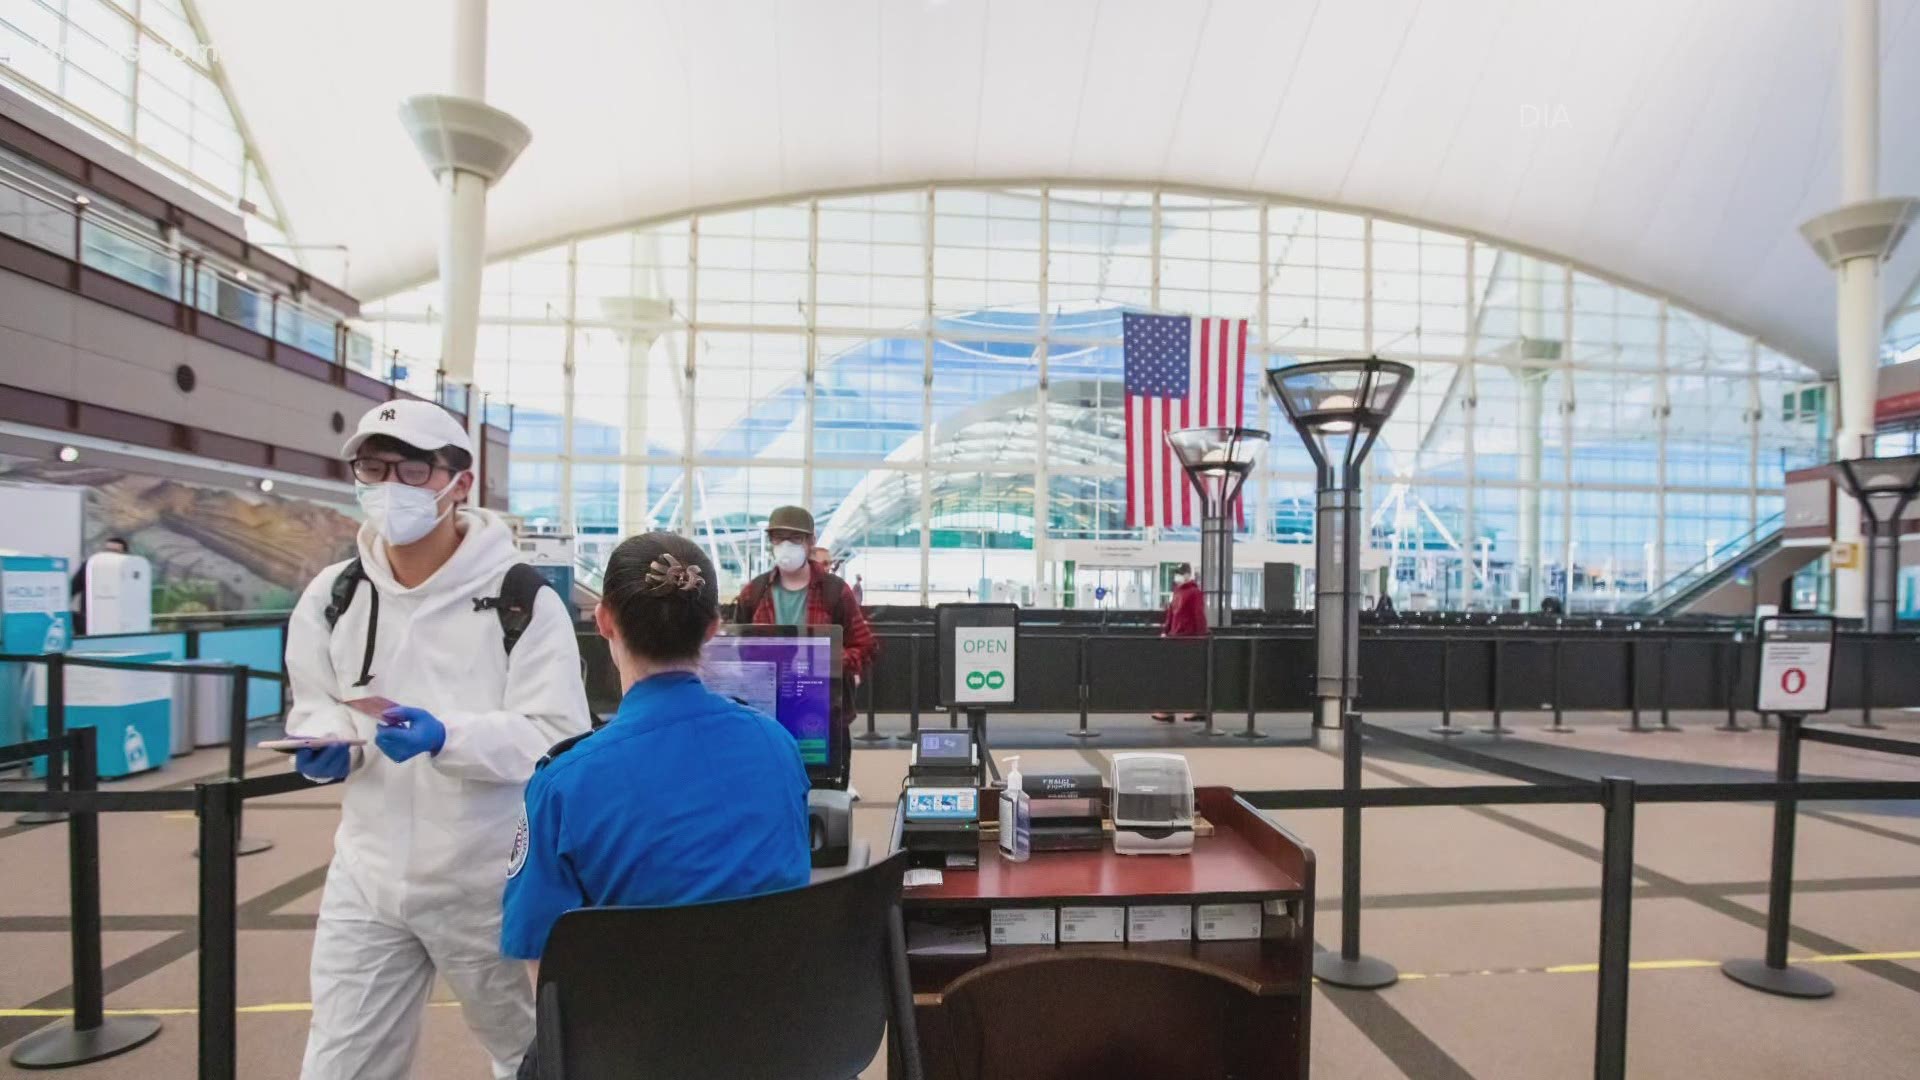 Denver International Airport tweeted today that a year ago this week was the lowest number of passengers they had during the pandemic.